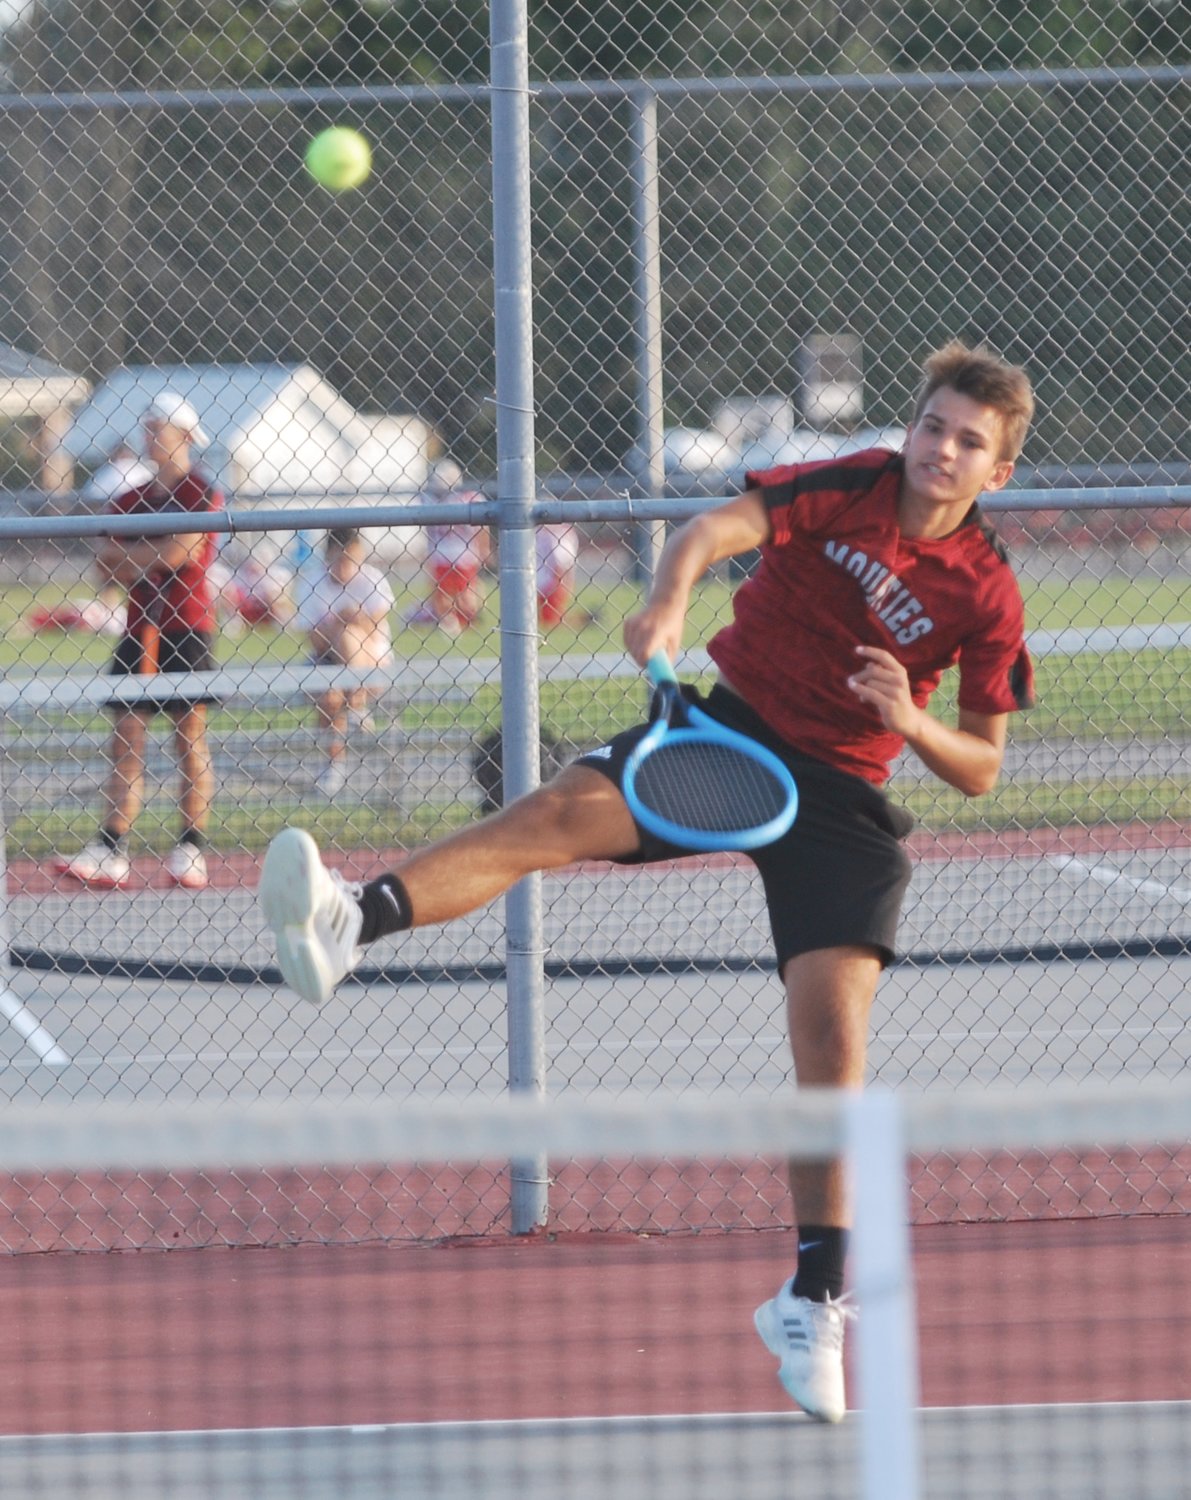 Southmont ace Adam Cox pulled off a straight-set win over Parke Heritages' Evan James at No. 1 singles.